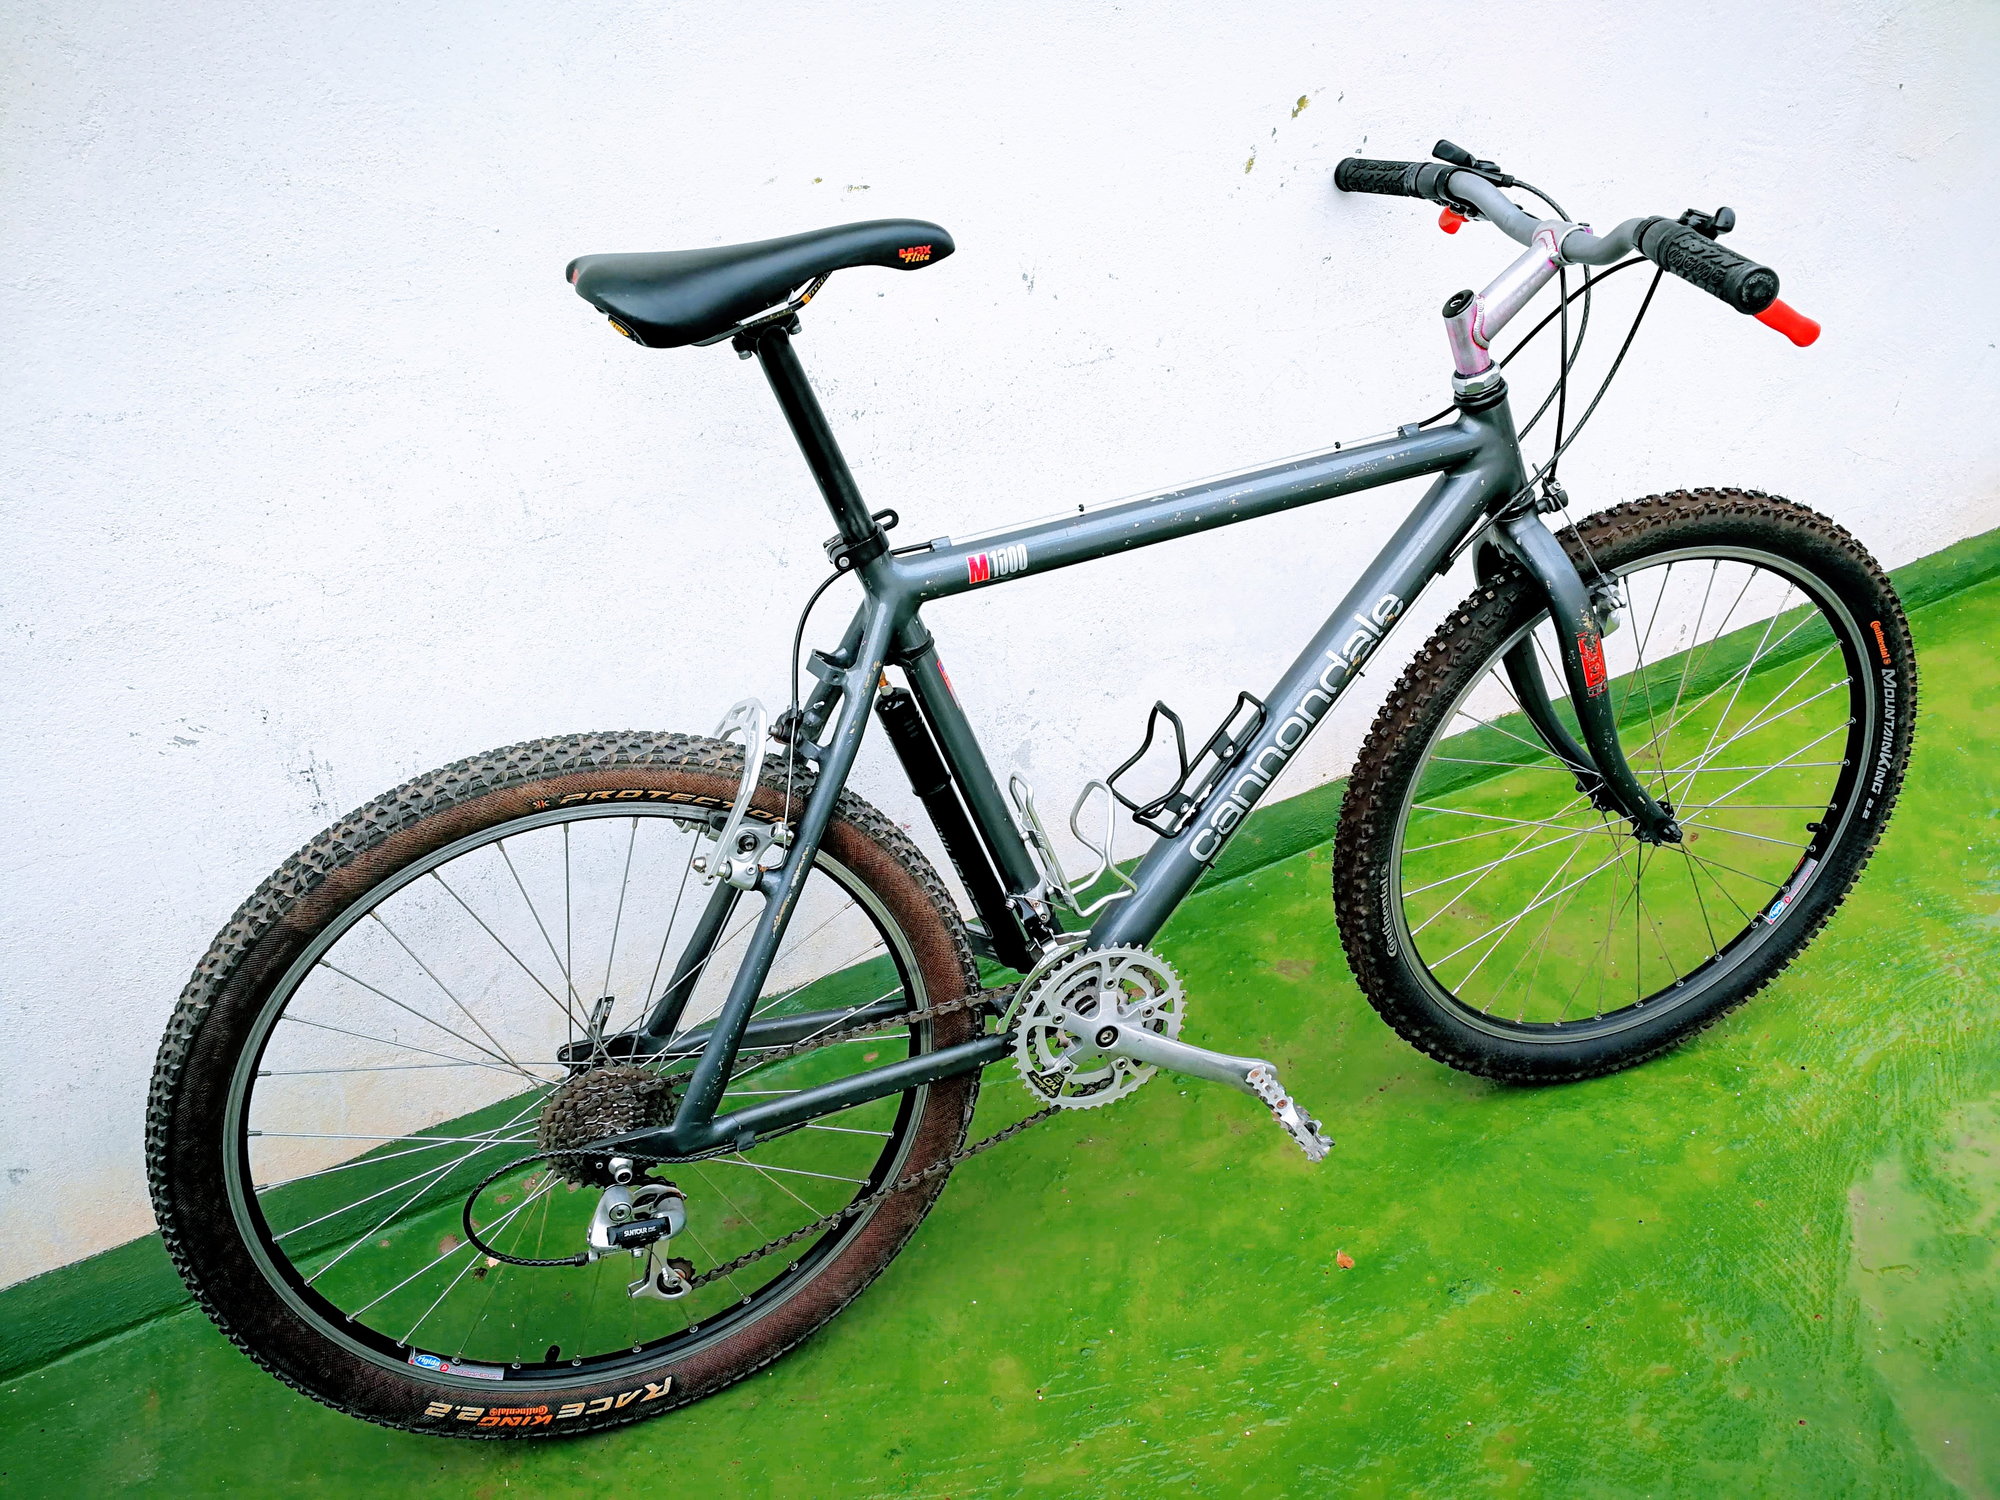 What are your favorite vintage mountain bikes? -